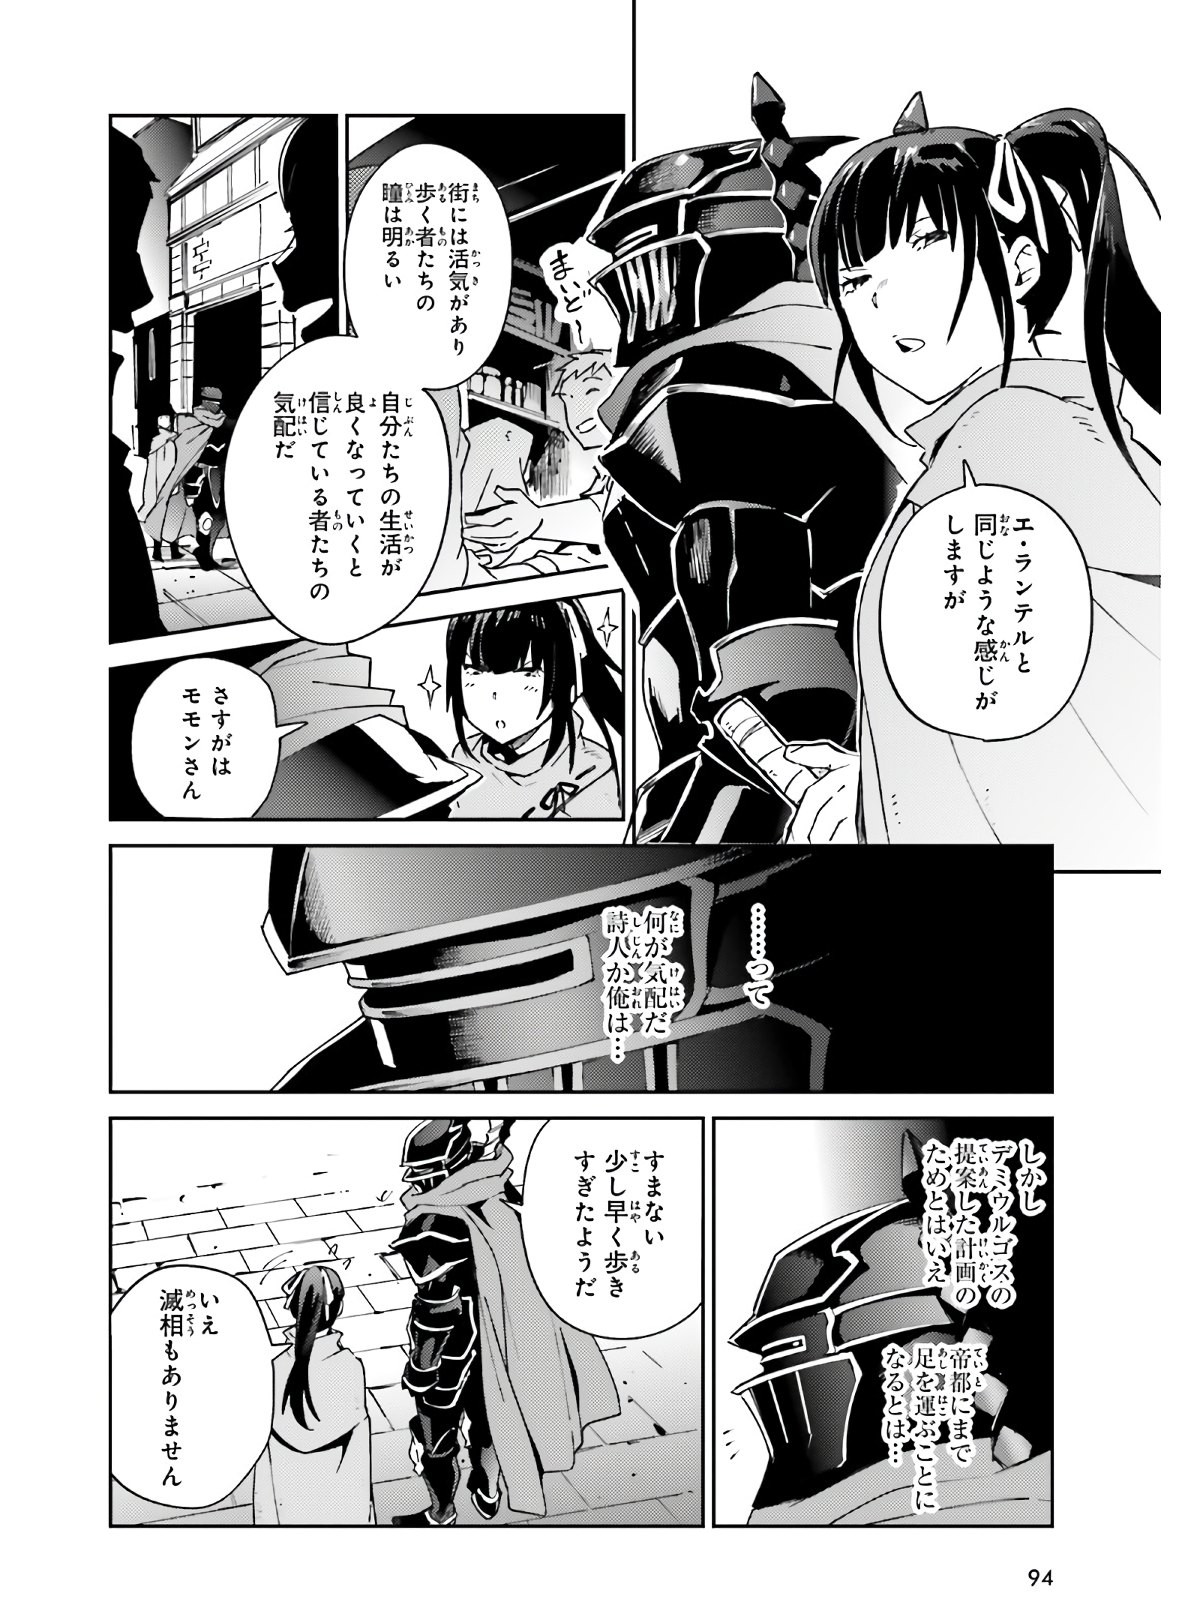 Overlord - Chapter 61 - Page 2